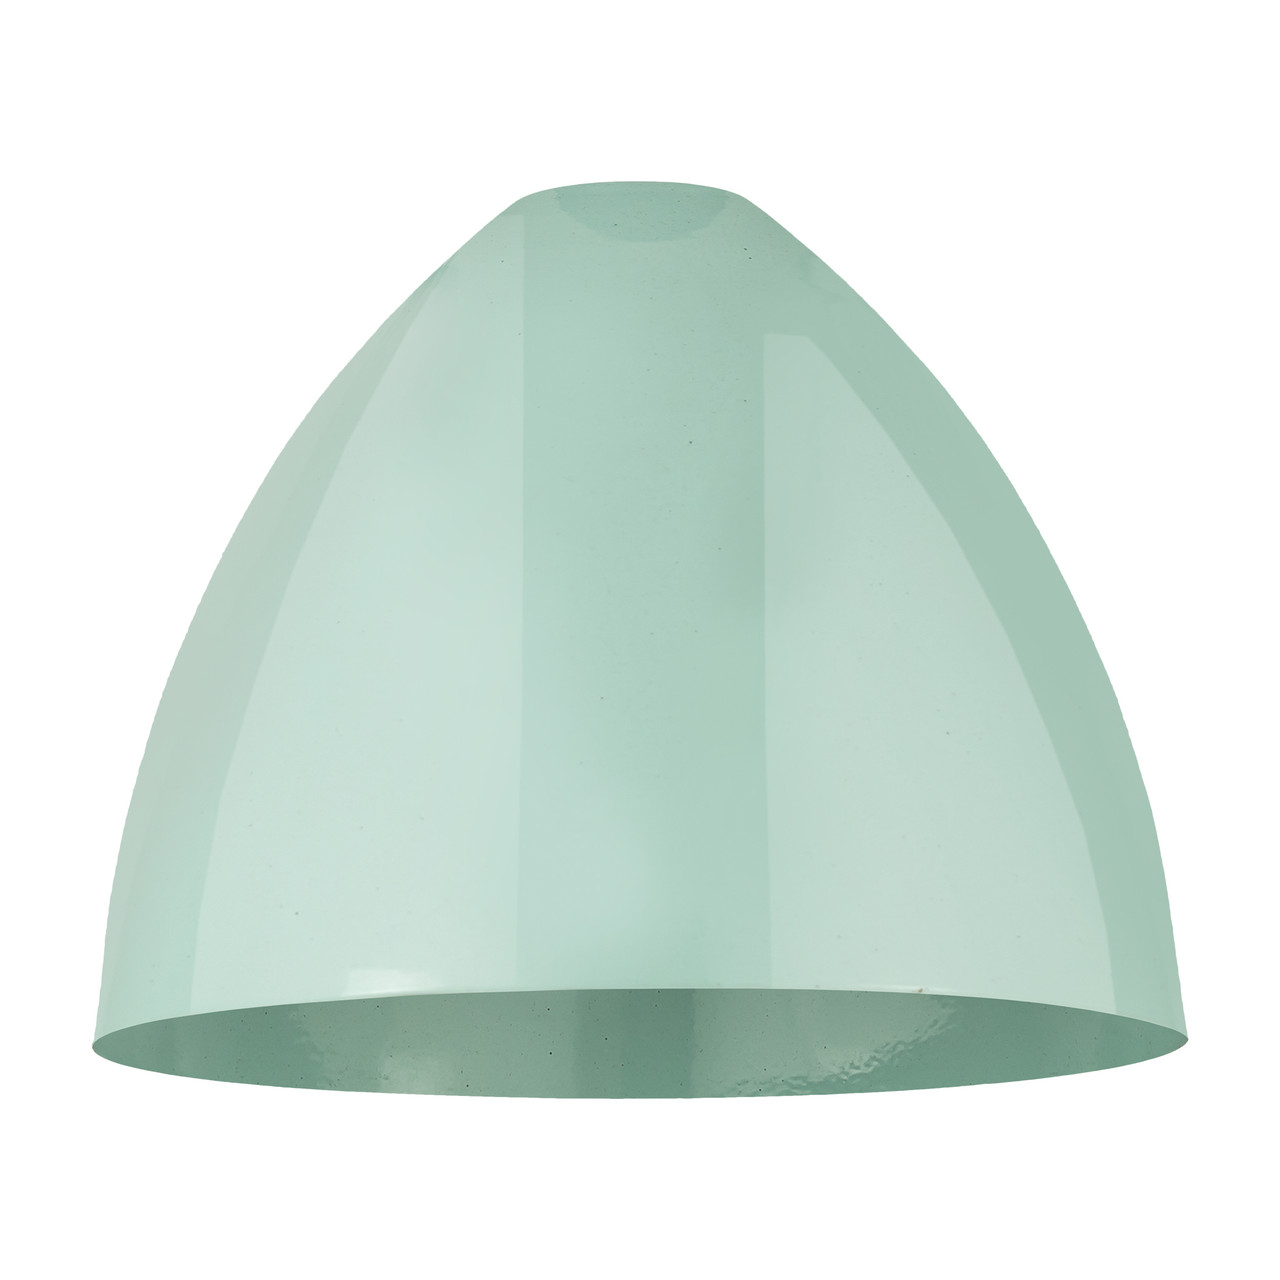 INNOVATIONS MBD-16-SF Plymouth Dome Light 16 inch Seafoam Metal Shade